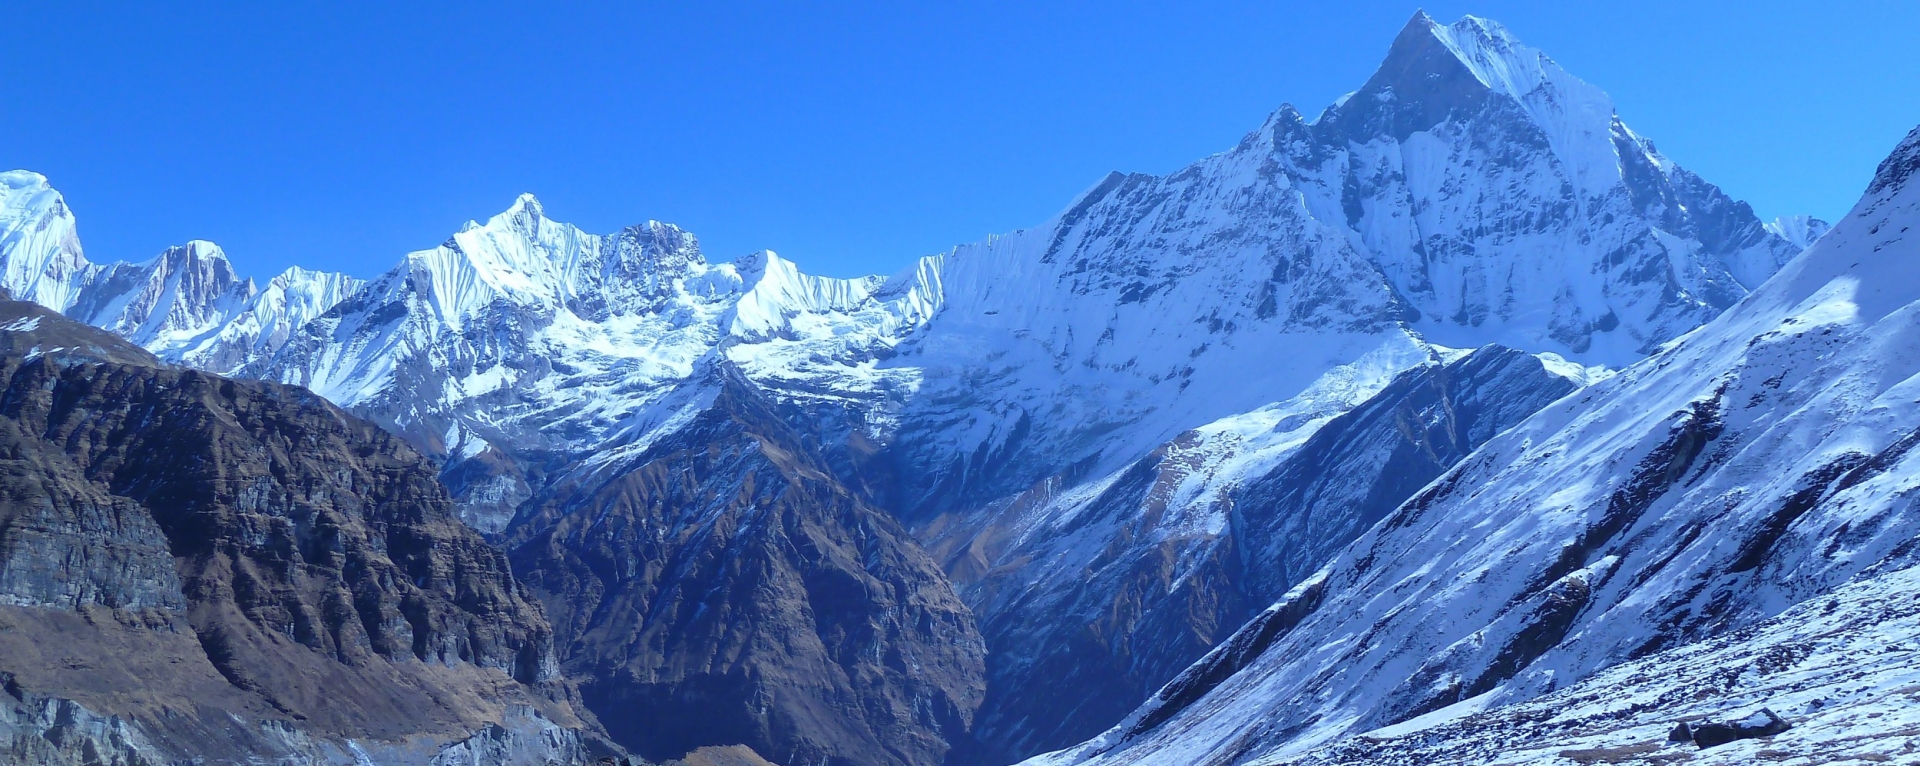 The view of Machhapuchre mountain from ABC(4130m), Nepal